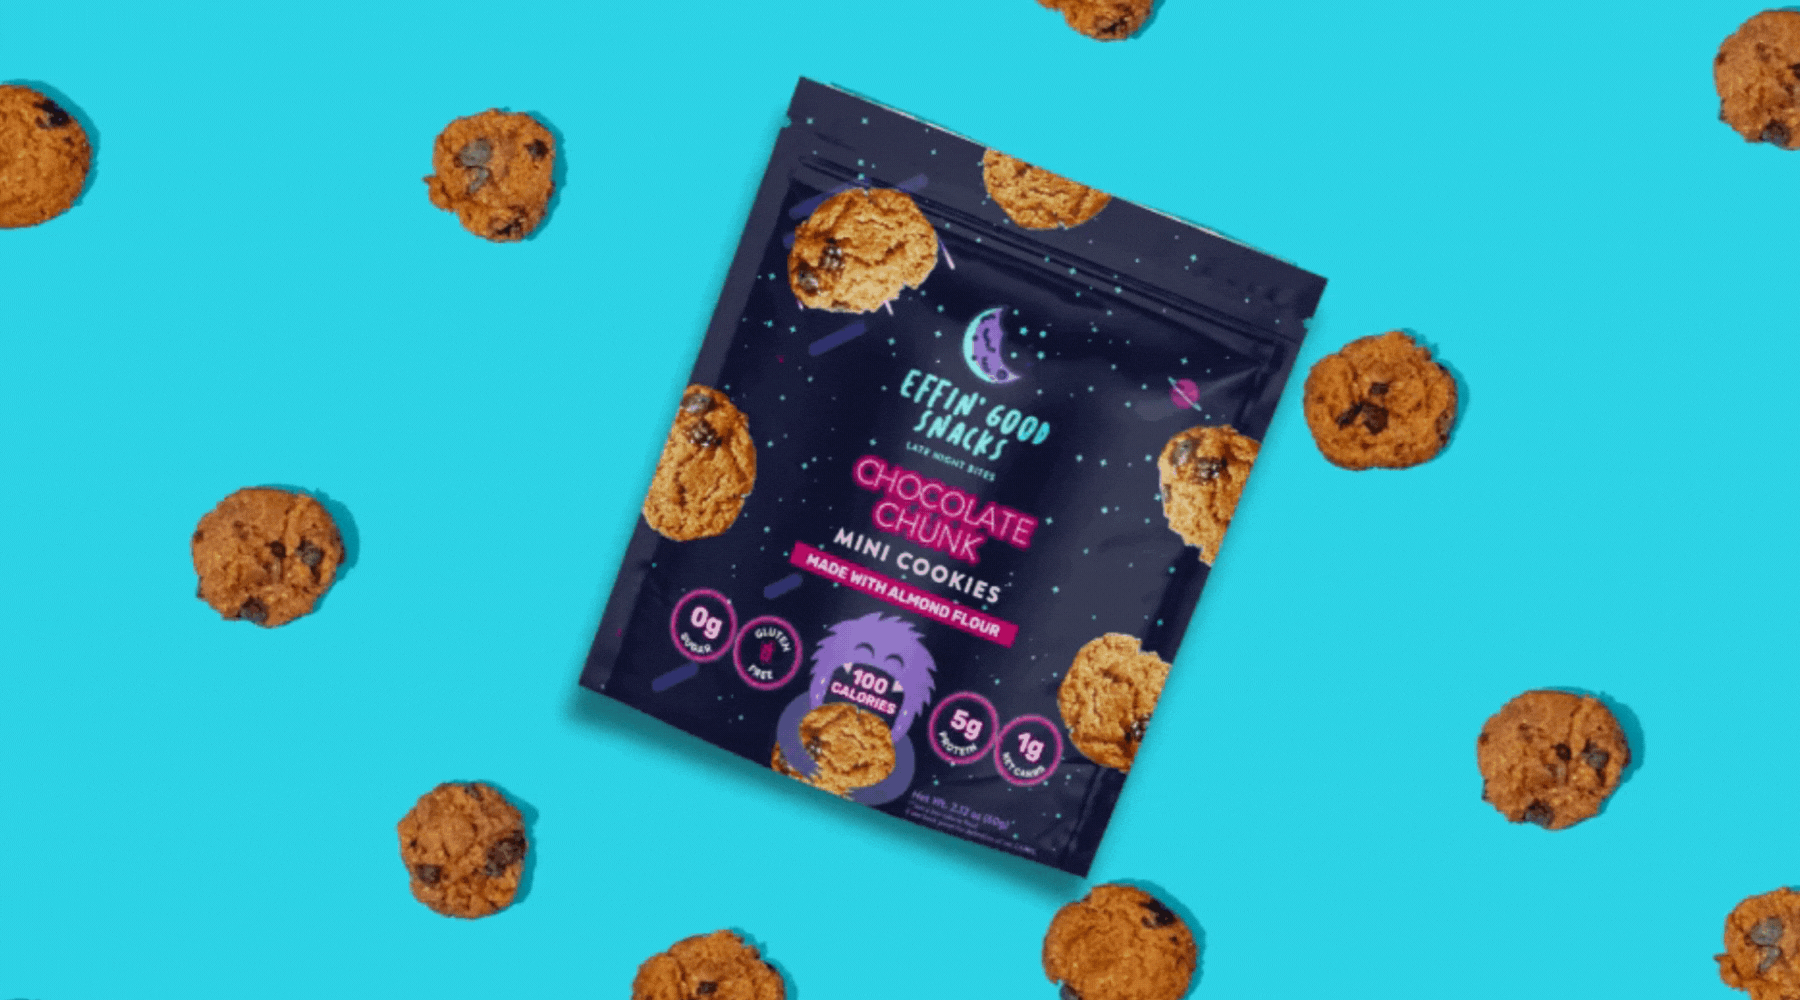 Delicious low carb cookies order online.Best keto friendly chocolate chip cookies gif. Space blue package, neon pink lettering, midnight cookie monster graphic.